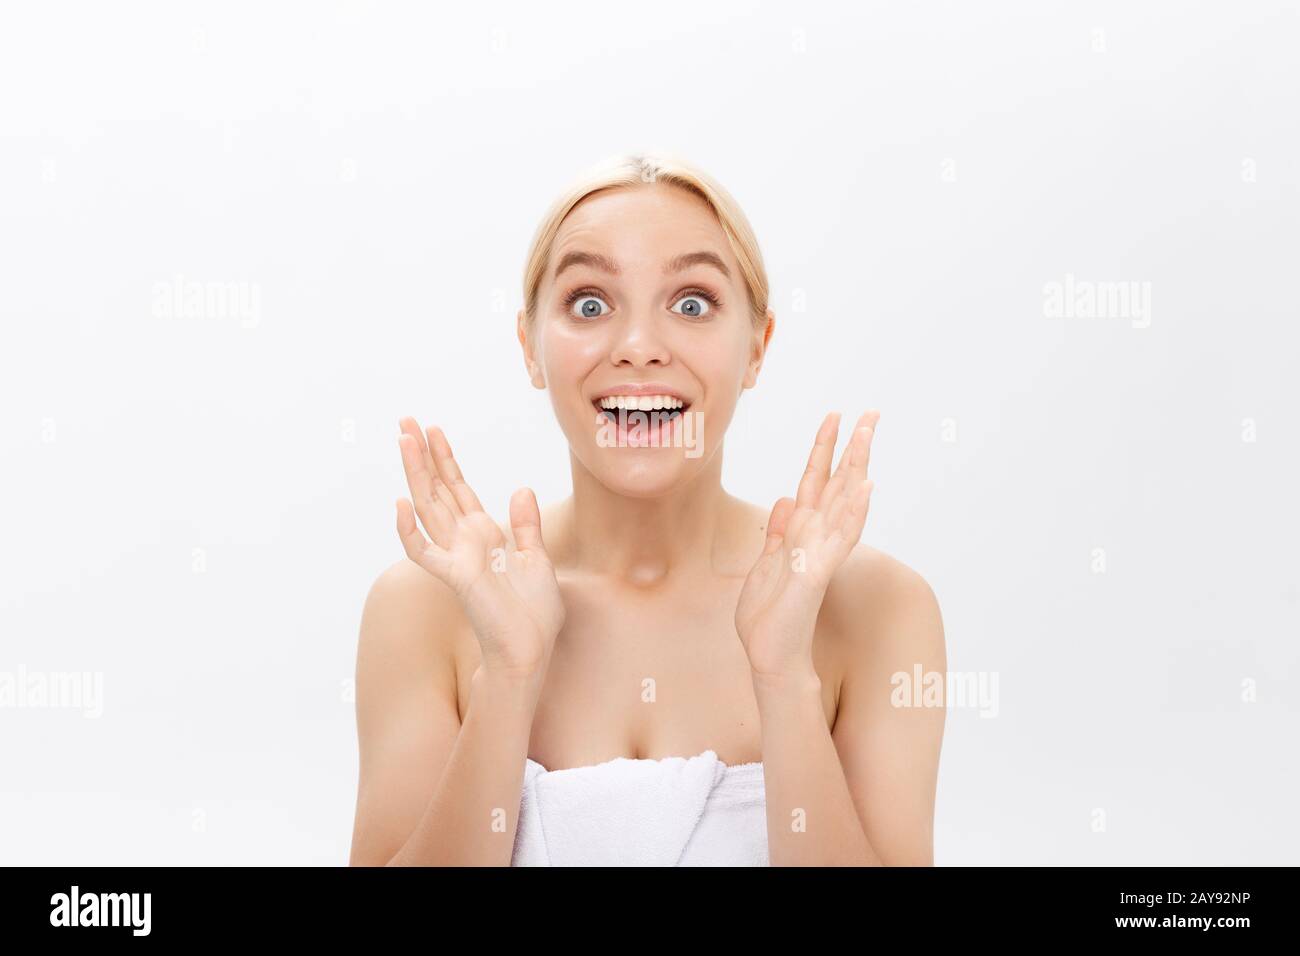 Image of excited screaming young beauty skin woman standing isolated over white background. Looking camera. Stock Photo